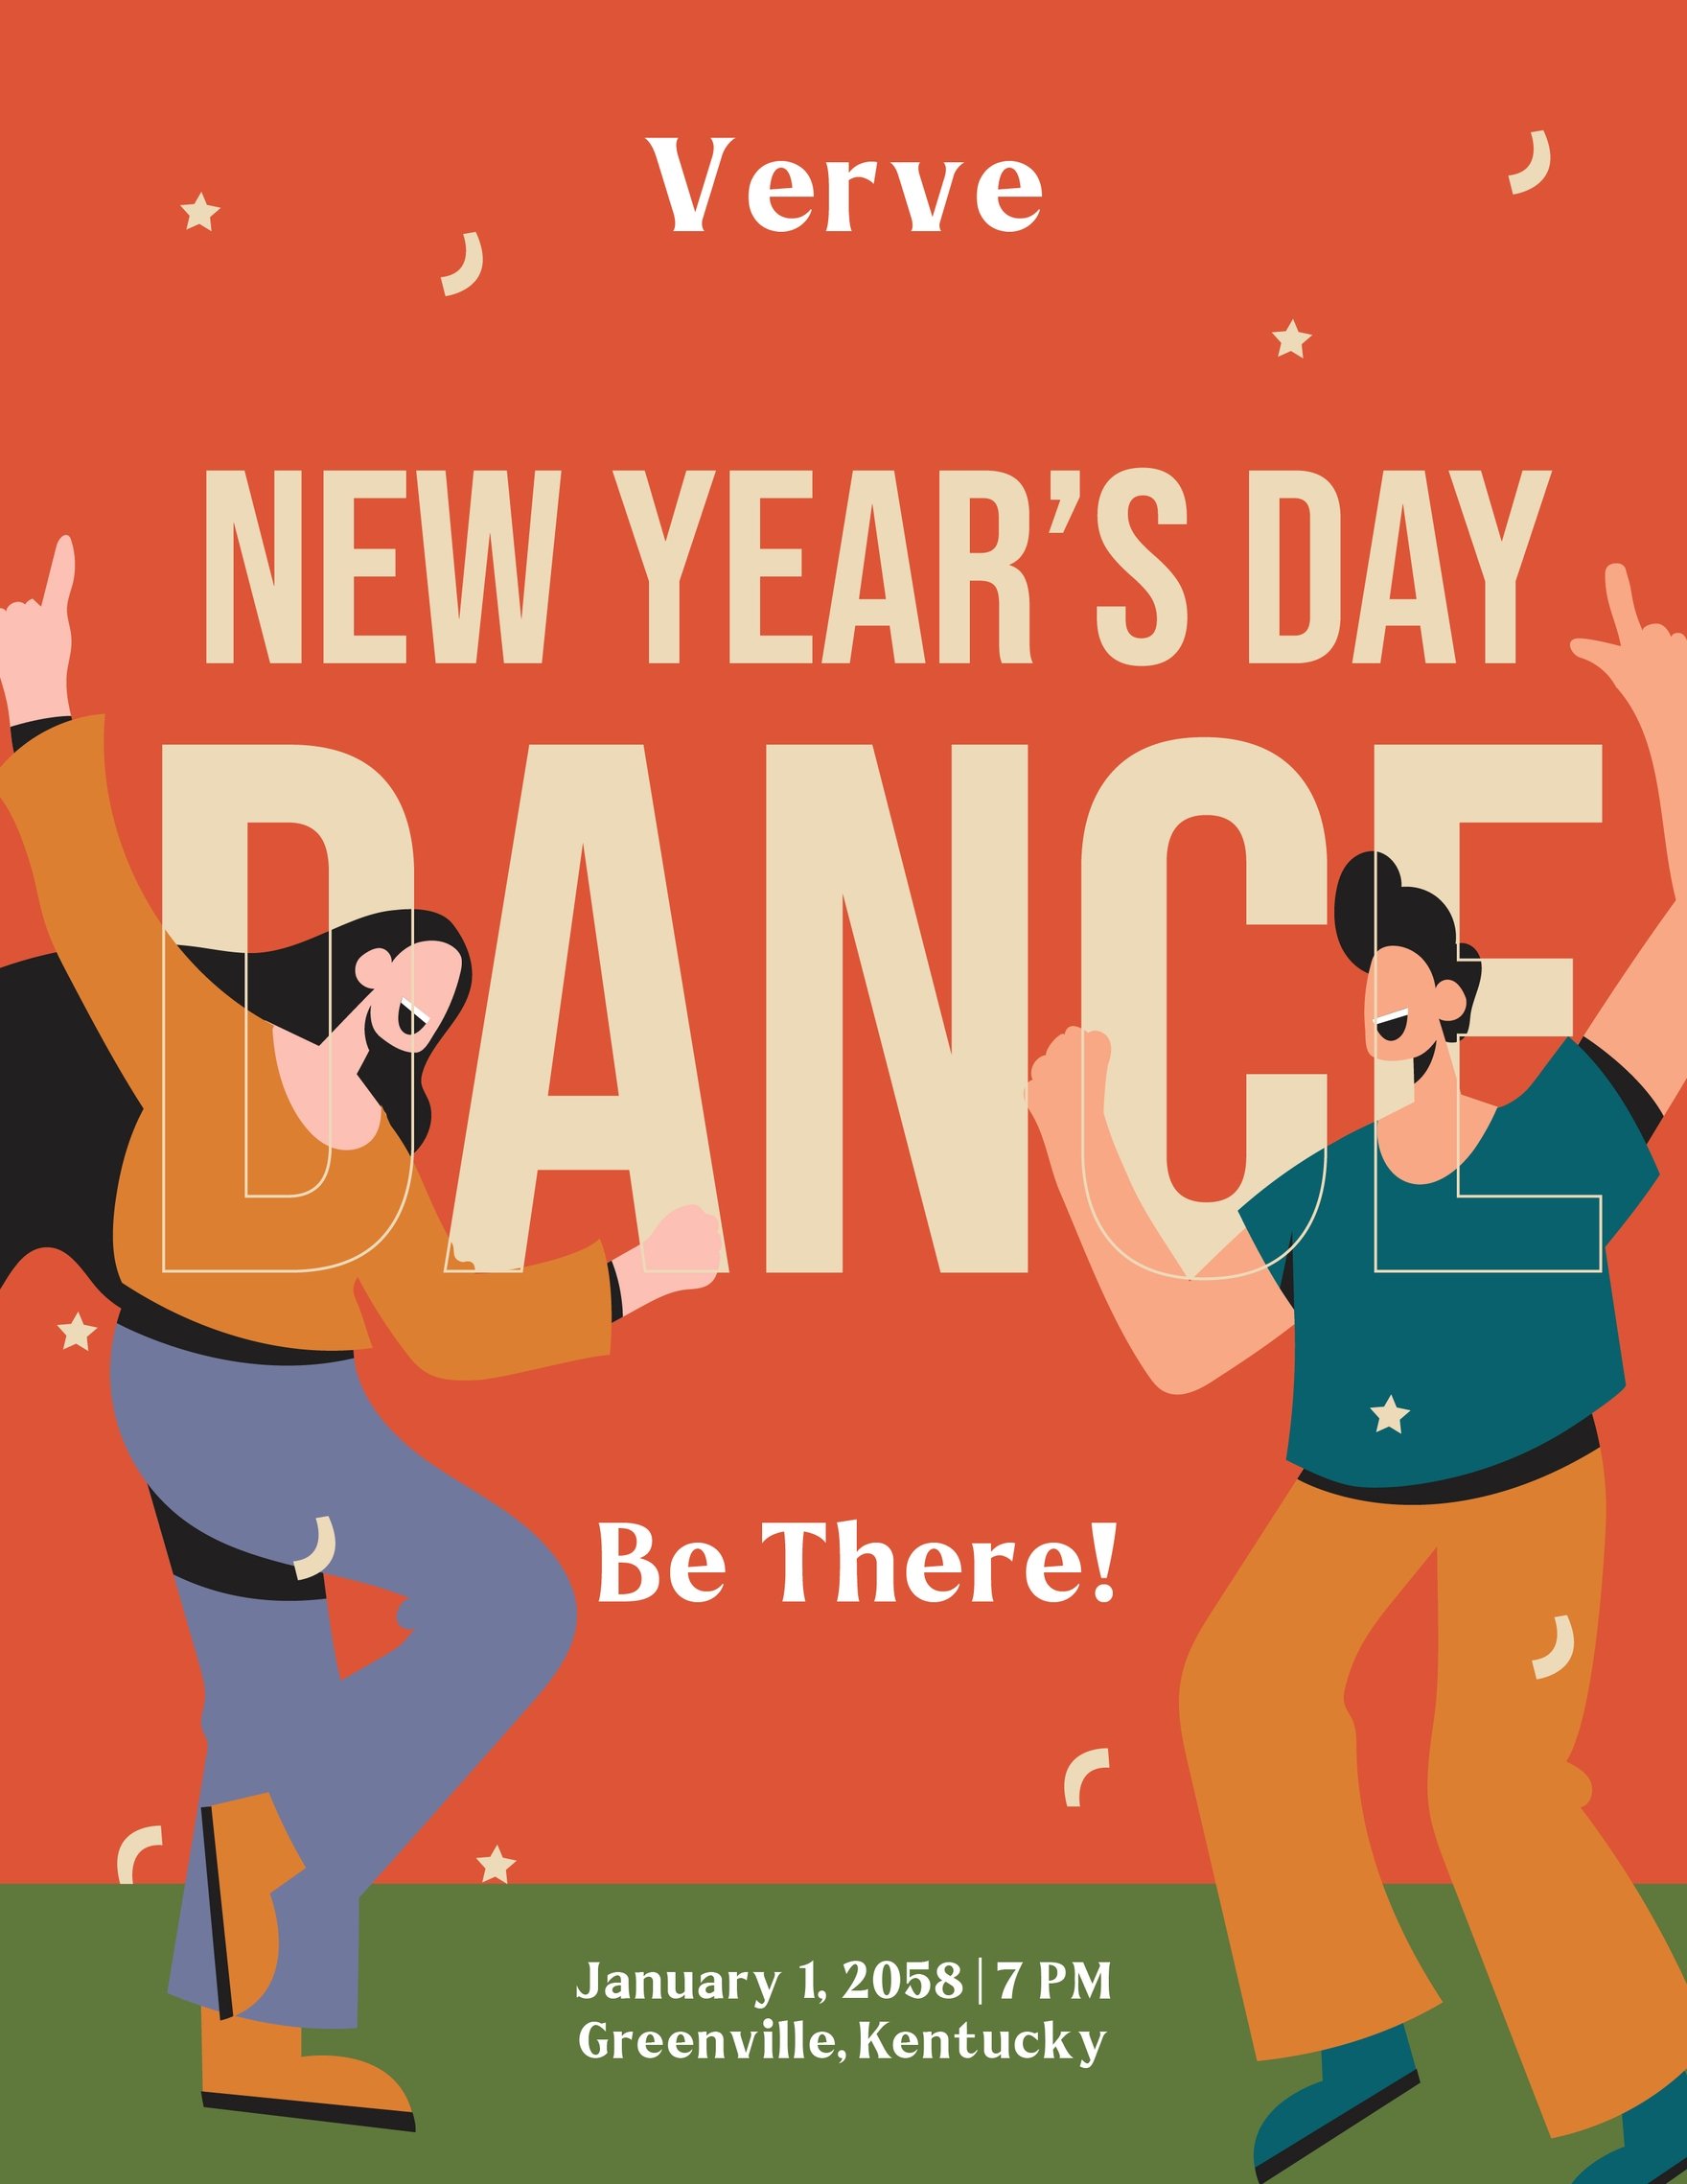 Free New Year's Day Mockup Flyer in Word, Google Docs, Illustrator, PSD, Apple Pages, Publisher, EPS, SVG, JPG, PNG